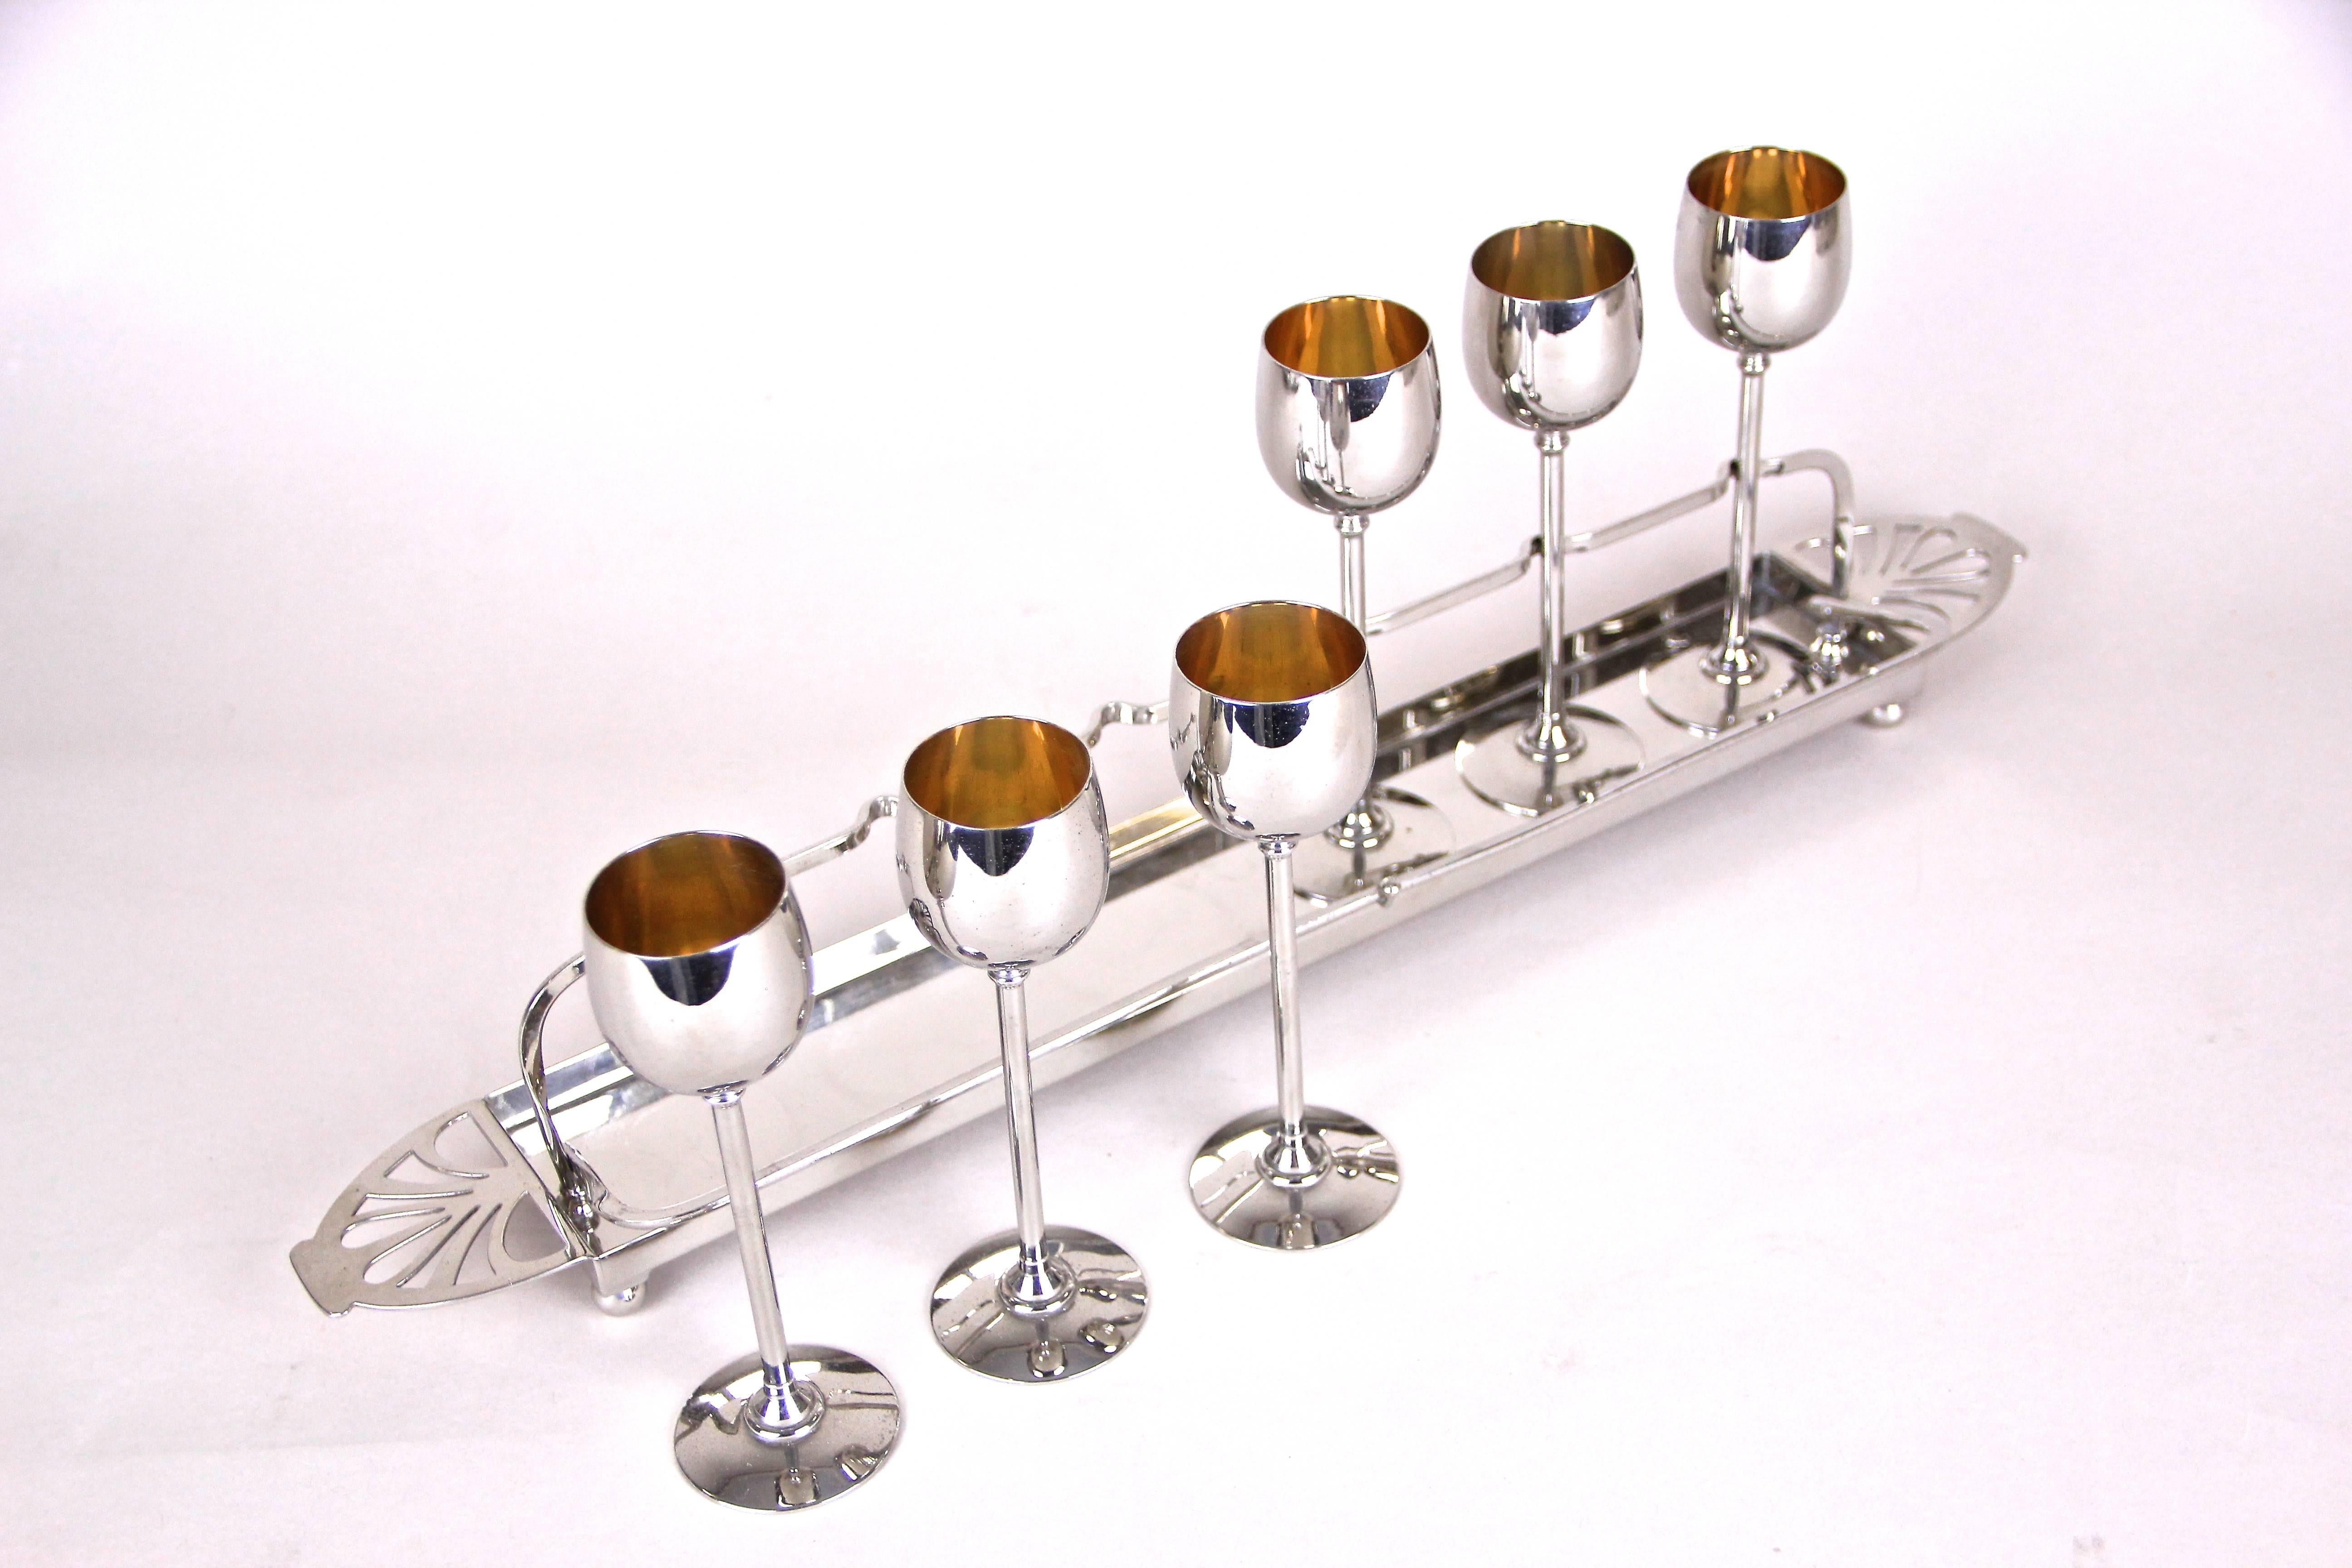 Exceptional Art Nouveau liquor glasses by WMF from Germany. From circa 1910, this marvelous set consists of six glasses that Stand on a great designed slender nickel plated metal stand saved with an unique clasp, like the one that are well-known